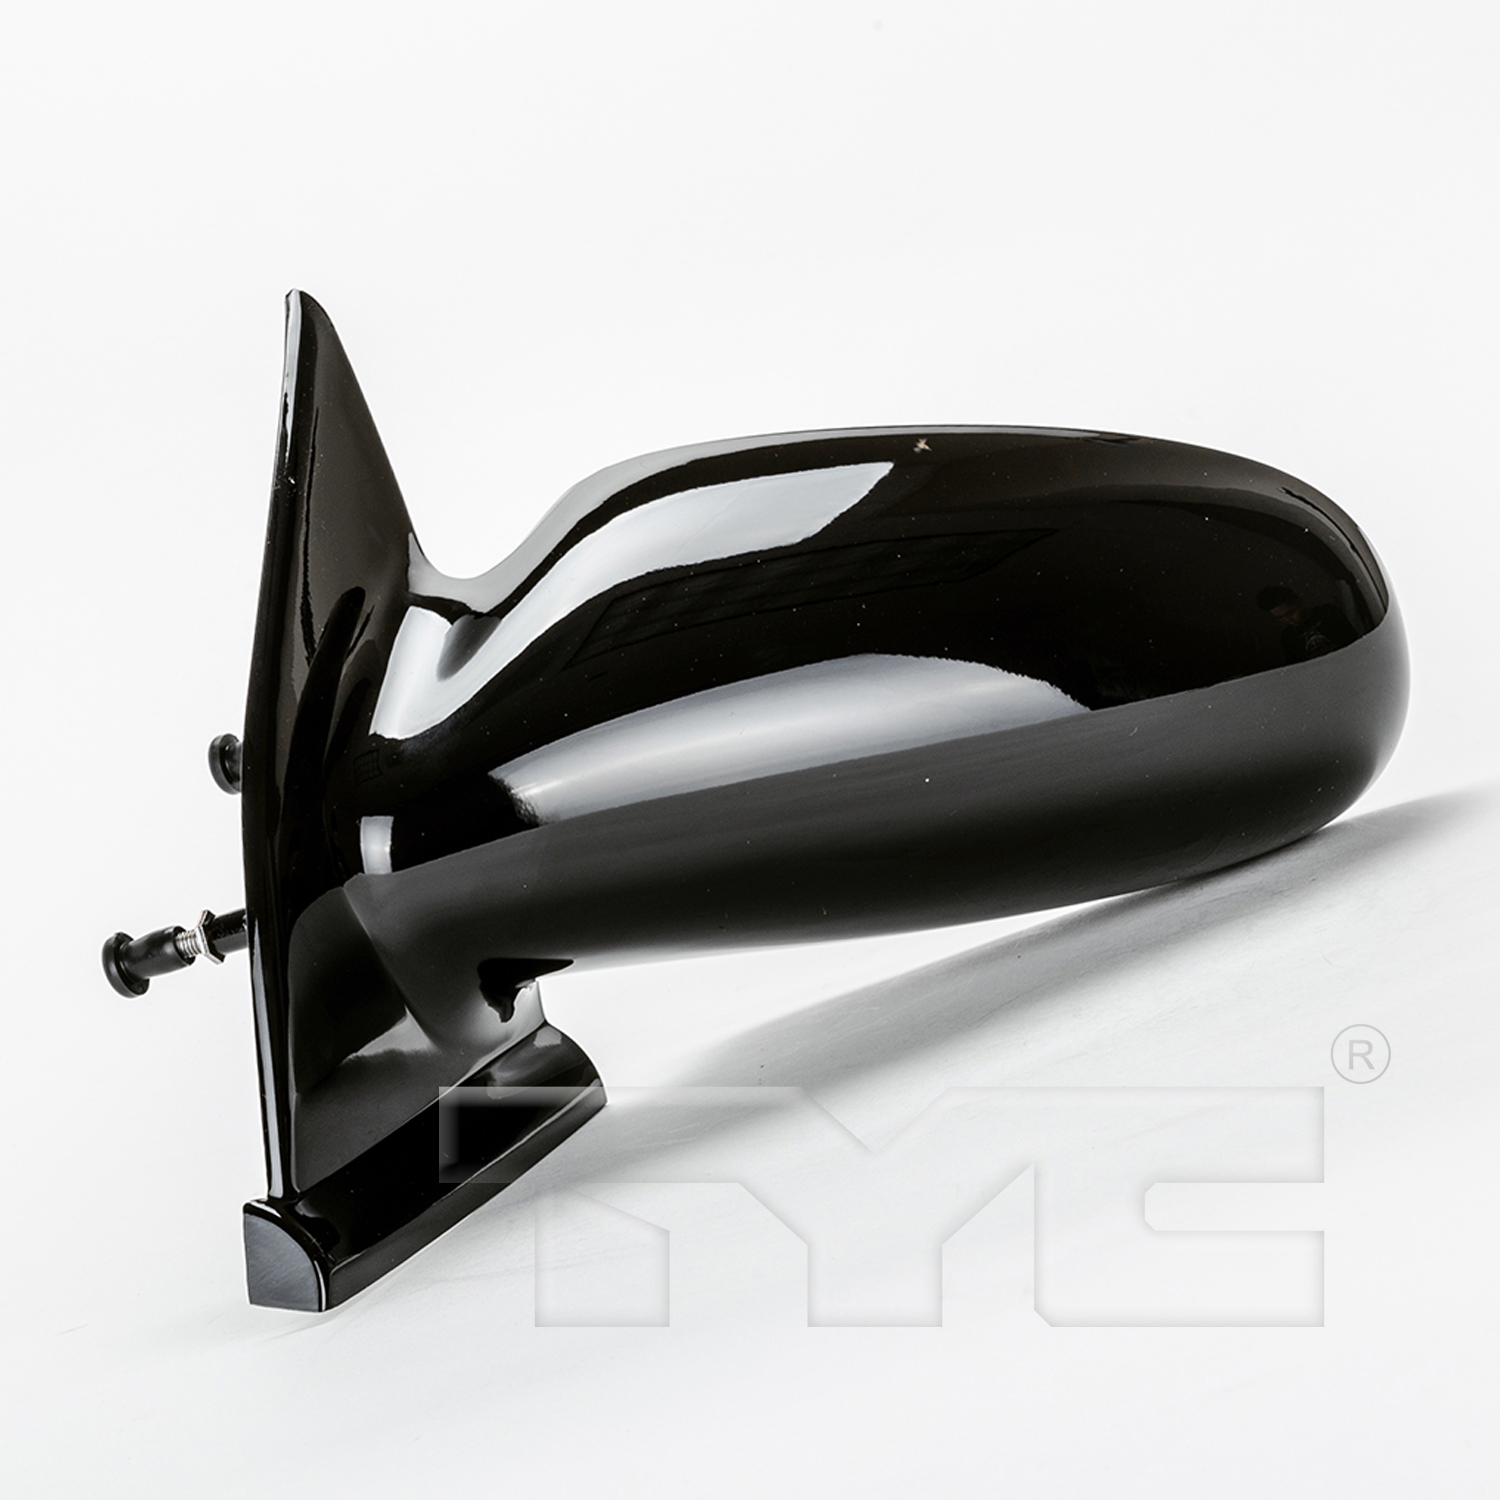 Aftermarket MIRRORS for SATURN - SL1, SL1,96-02,LT Mirror outside rear view